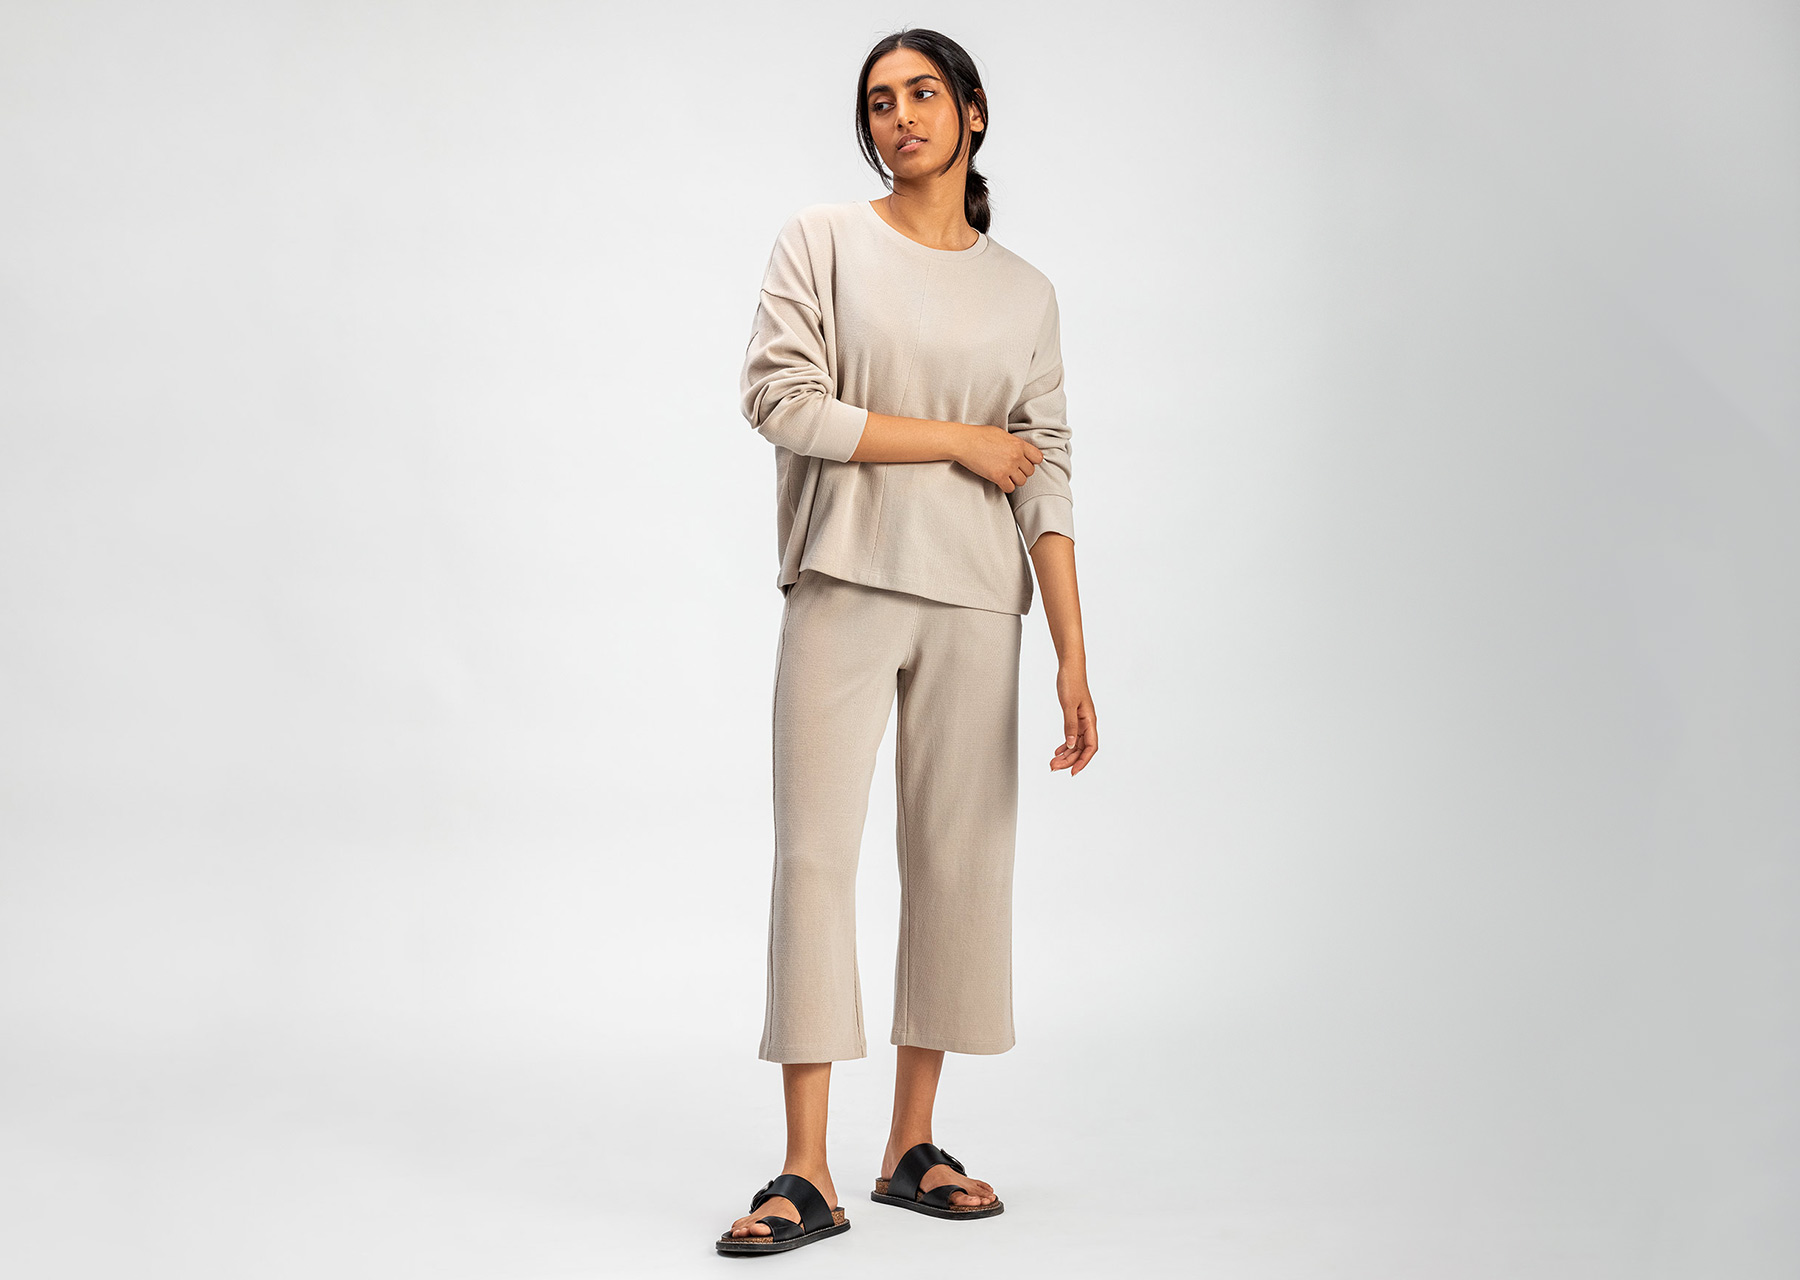 Textured Trousers  Buy Textured Trousers online in India